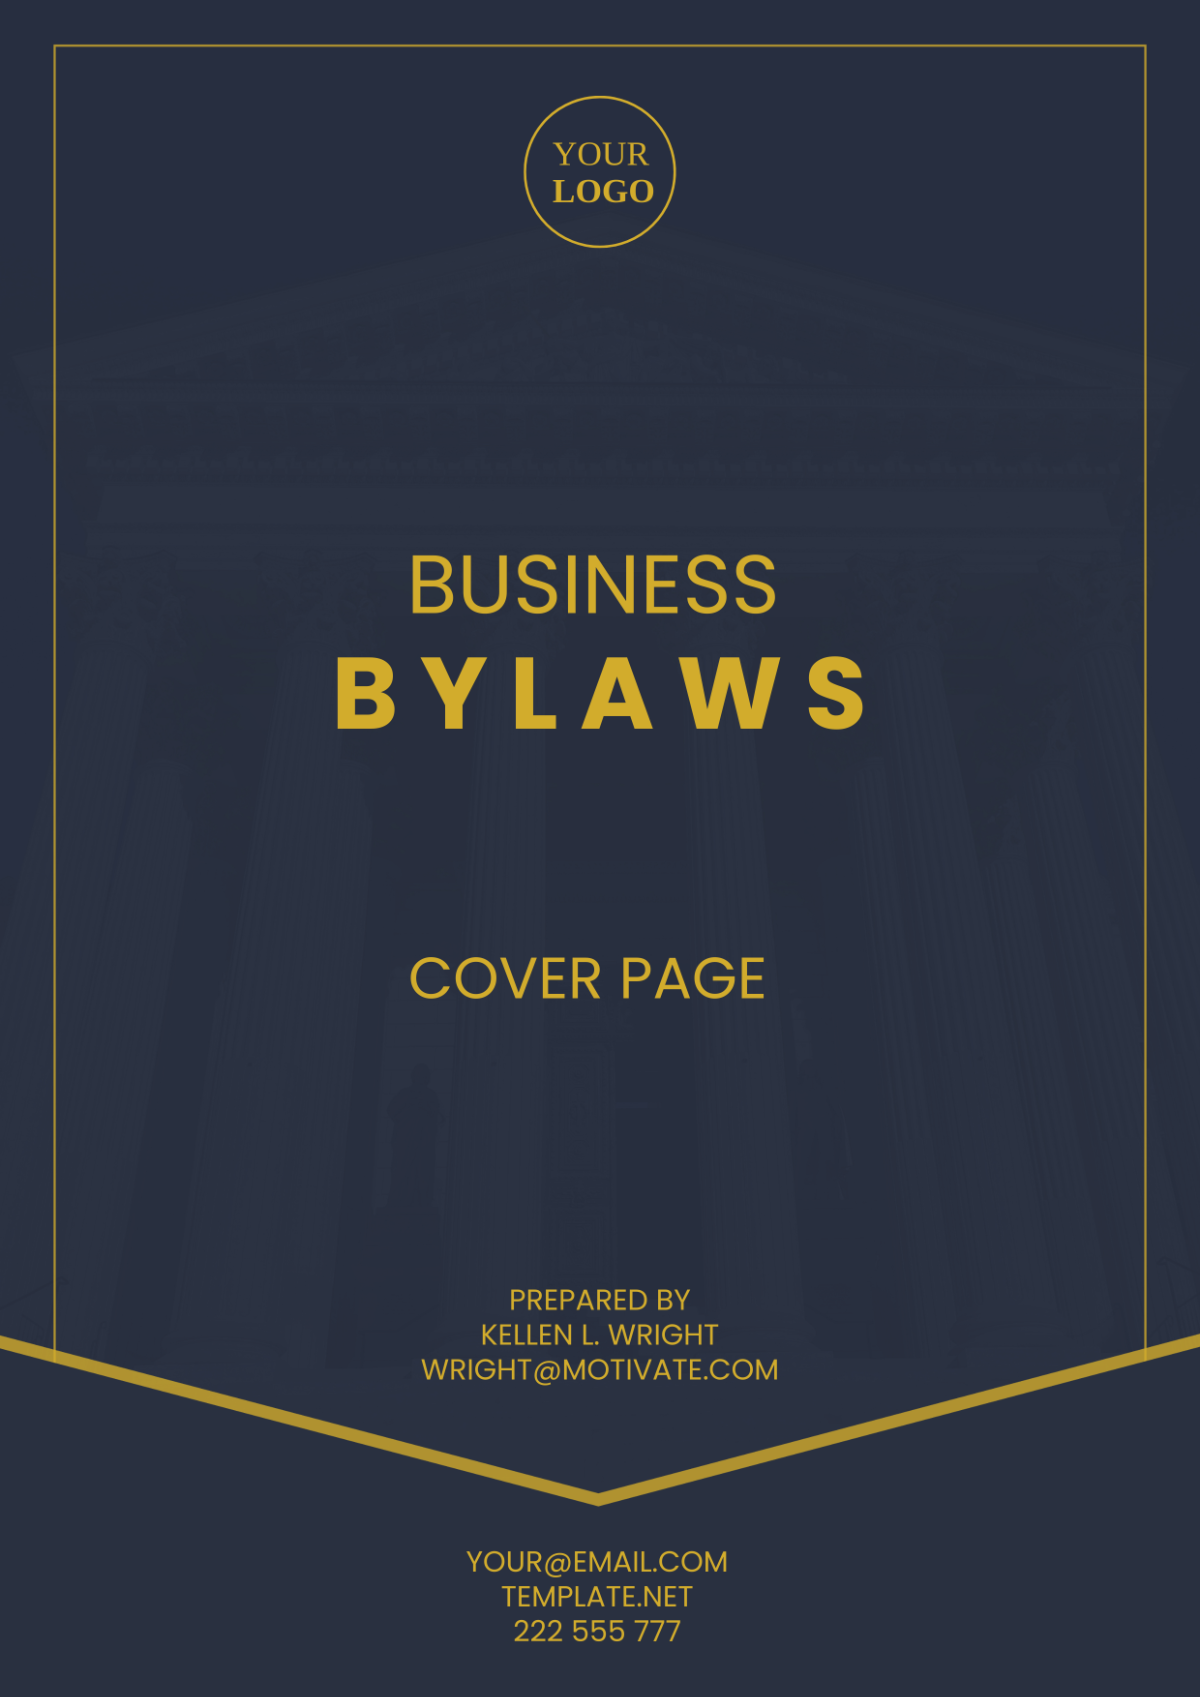 Business Bylaws Cover Page Template